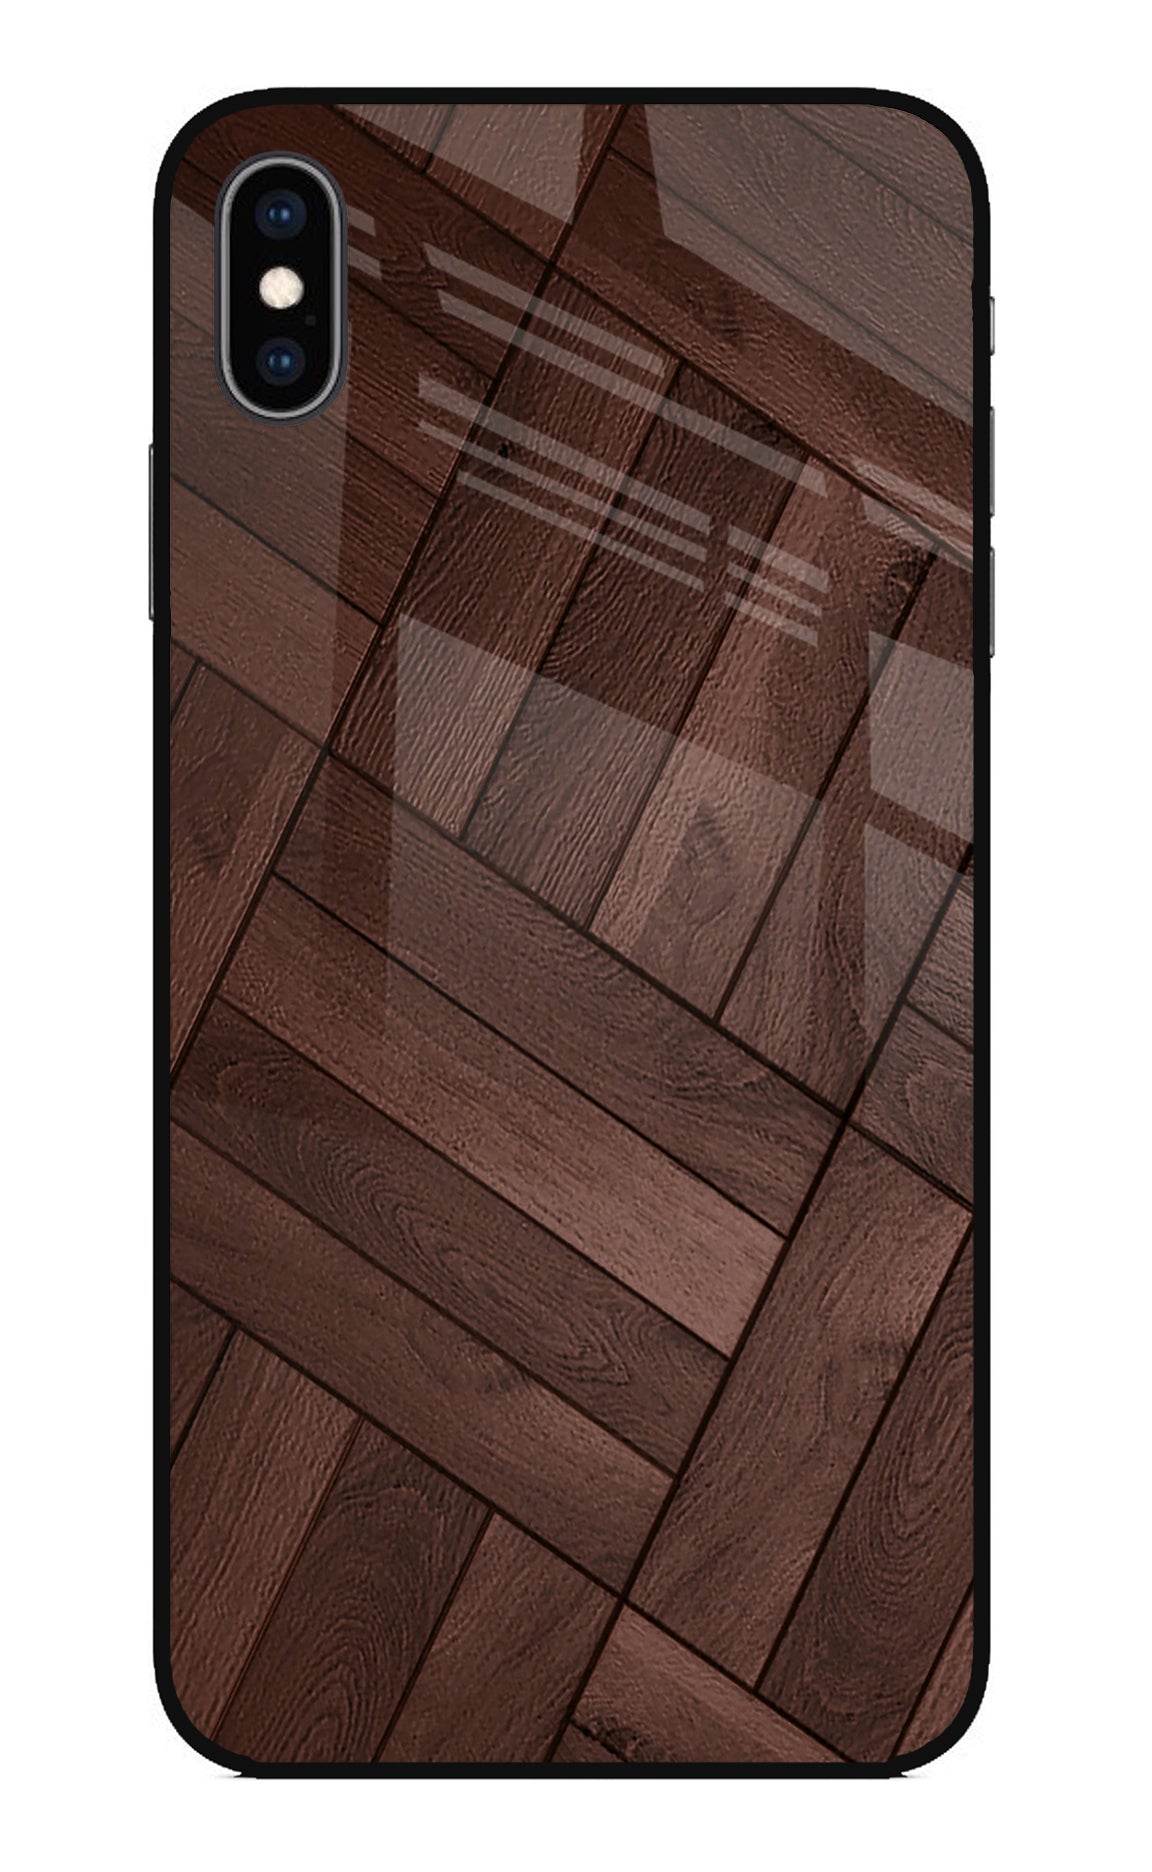 Wooden Texture Design iPhone XS Max Glass Case